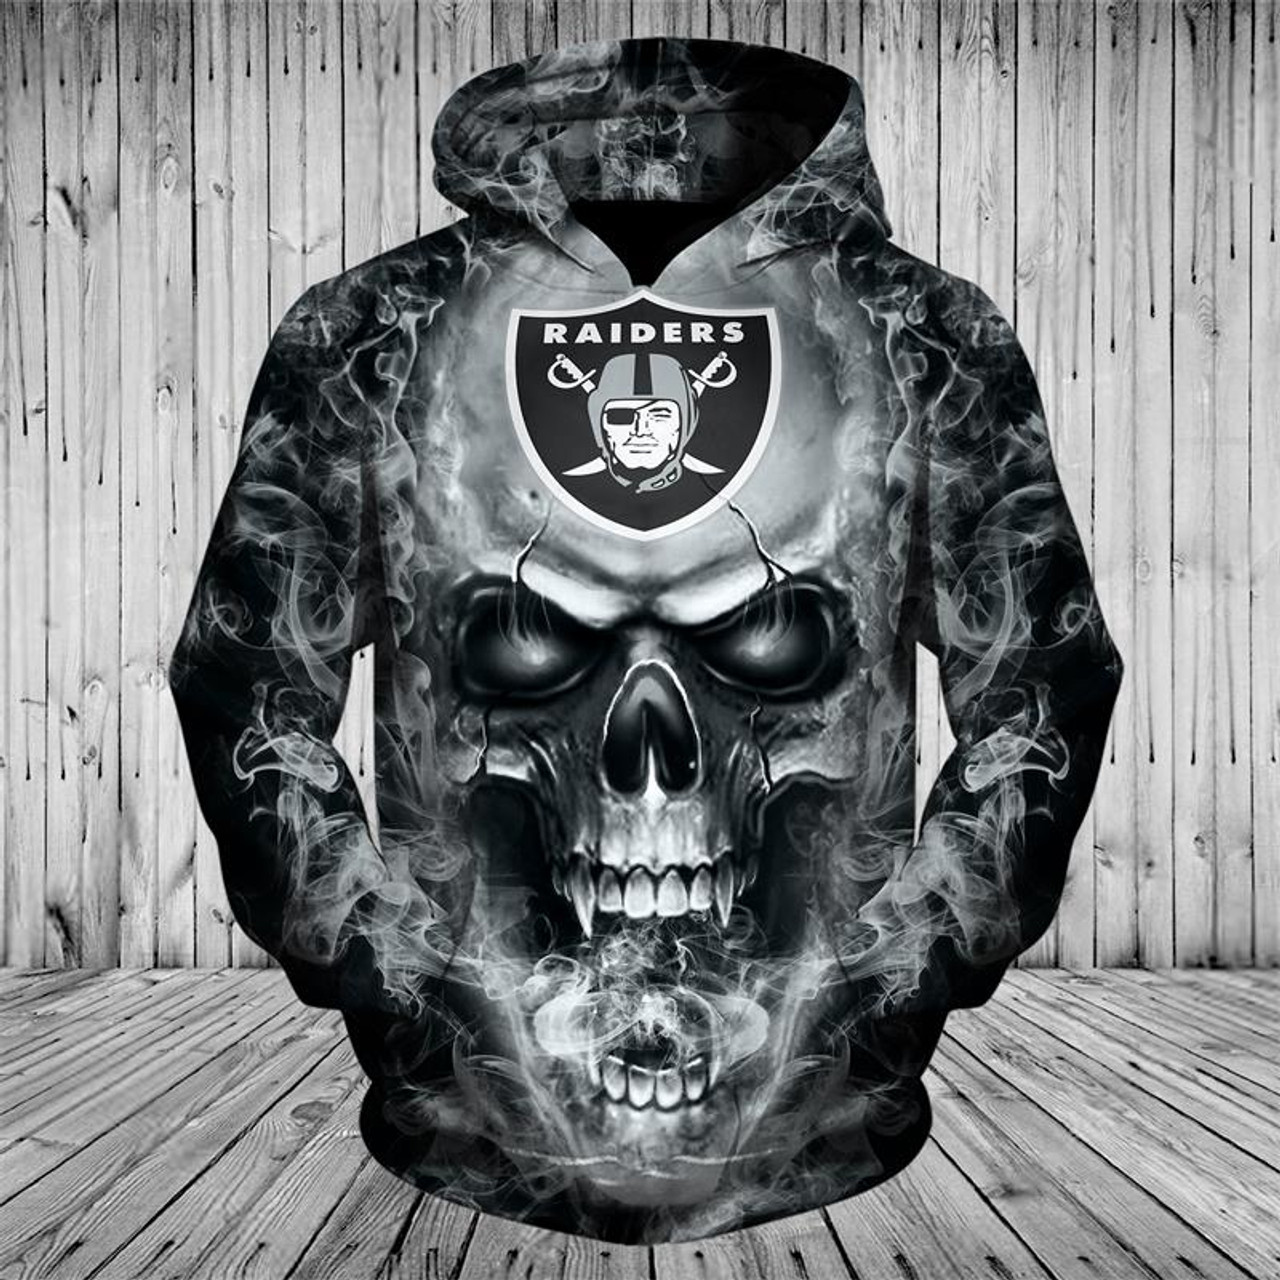 **(OFFICIAL-N.F.L.OAKLAND-RAIDERS-PULLOVER-HOODIES/CUSTOM-3D-NEON-RAIDERS-BLACK-SMOKING-SKULL,PREMIUM-3D-GRAPHIC-PRINTED,DOUBLE-SIDED-ALL-OVER-DESIGN/N.F.L.RAIDERS-TEAM-COLORED-WARM-PULLOVER-POCKET-HOODIES)** 